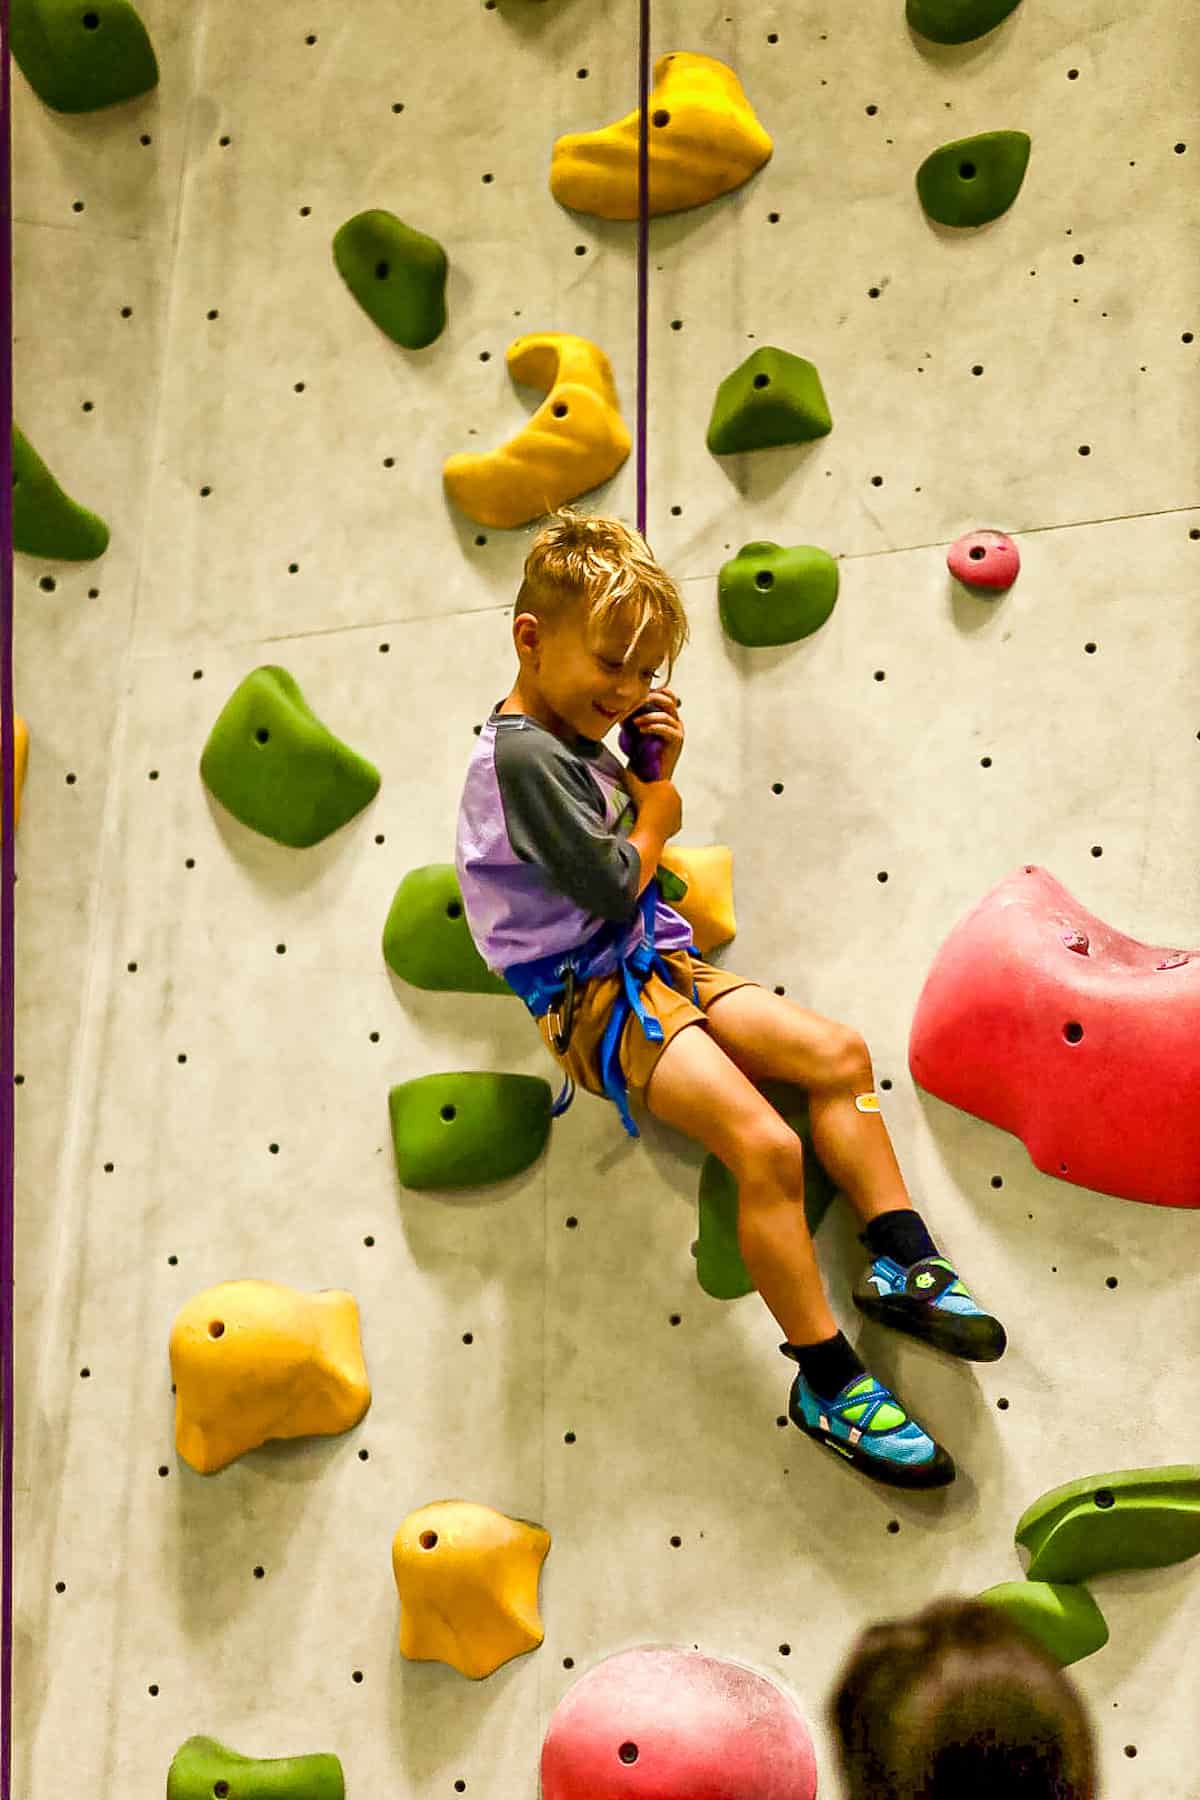 Rock climbing: everything you need to know before joining a climbing gym